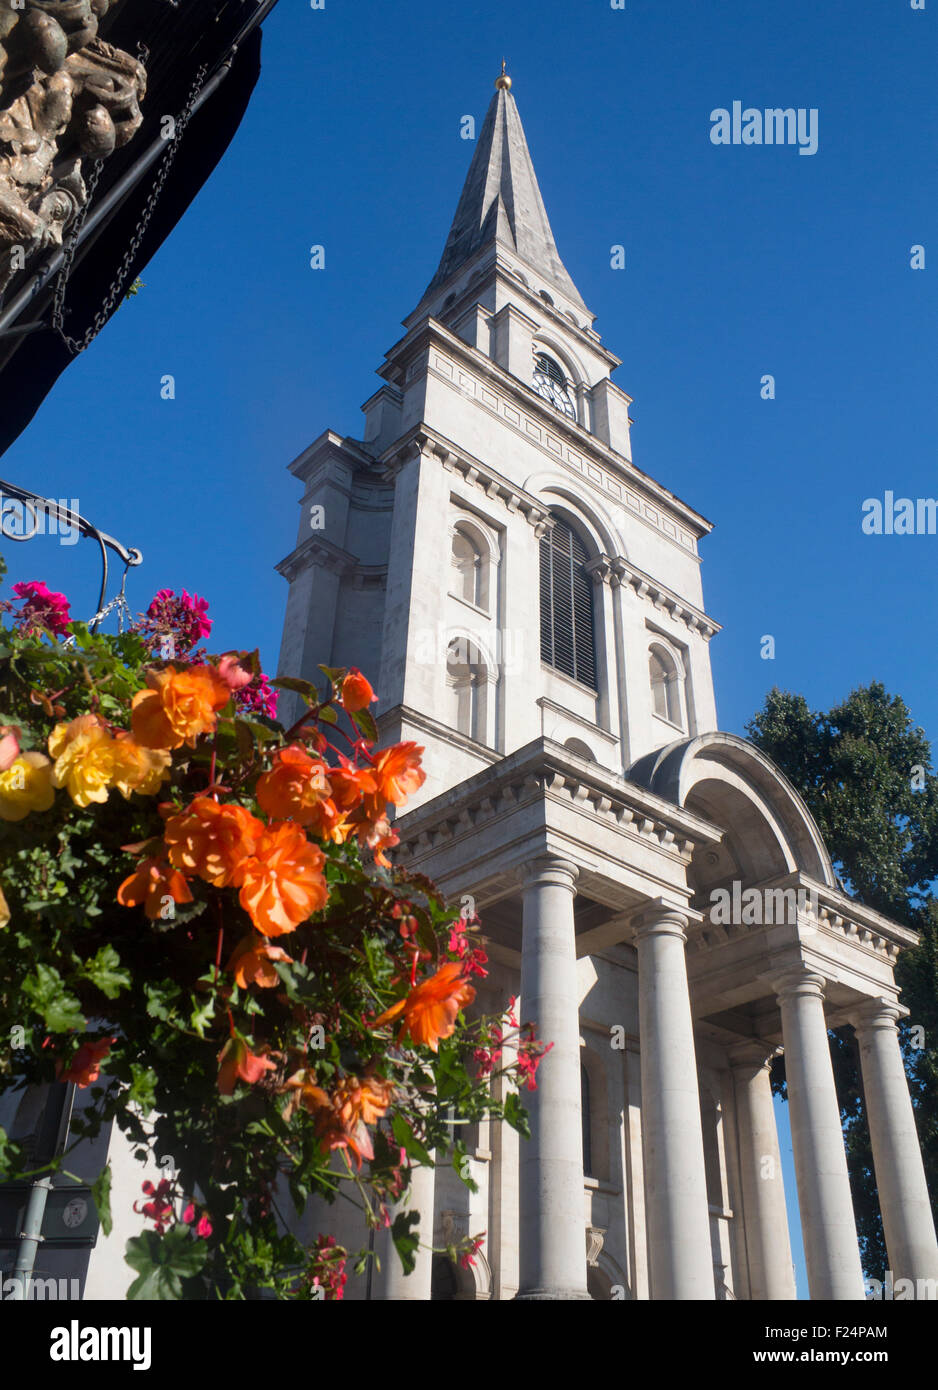 Christ Church Spitalfields tower and portico with flowers in foreground East End London England UK Stock Photo